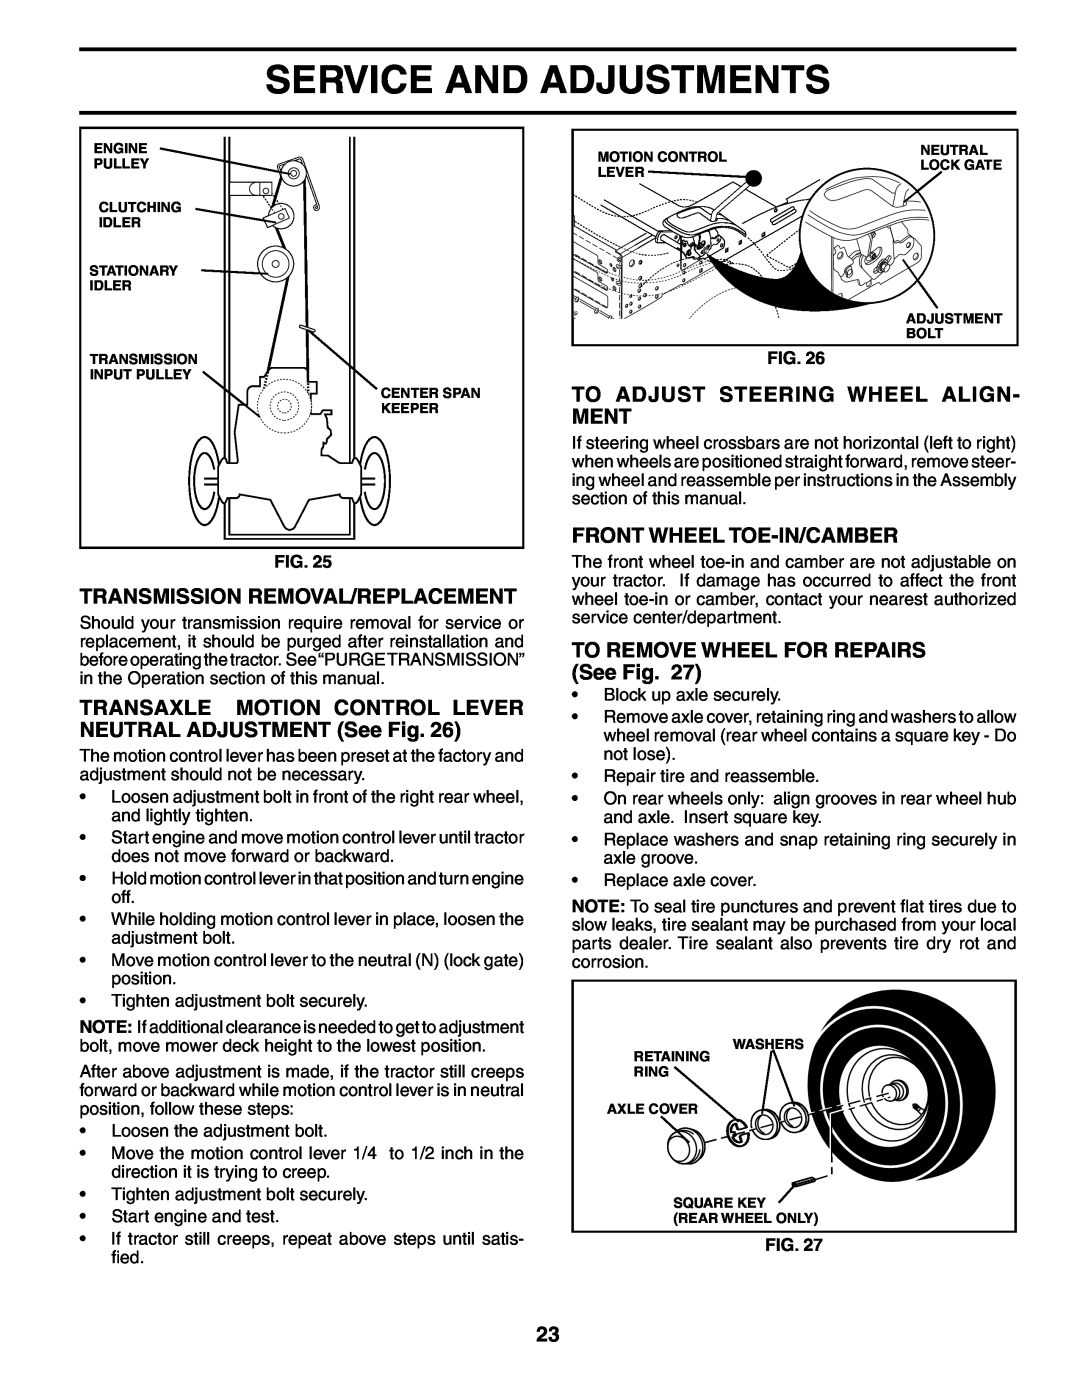 Poulan PD20H42STA owner manual Transmission Removal/Replacement, TRANSAXLE MOTION CONTROL LEVER NEUTRAL ADJUSTMENT See Fig 